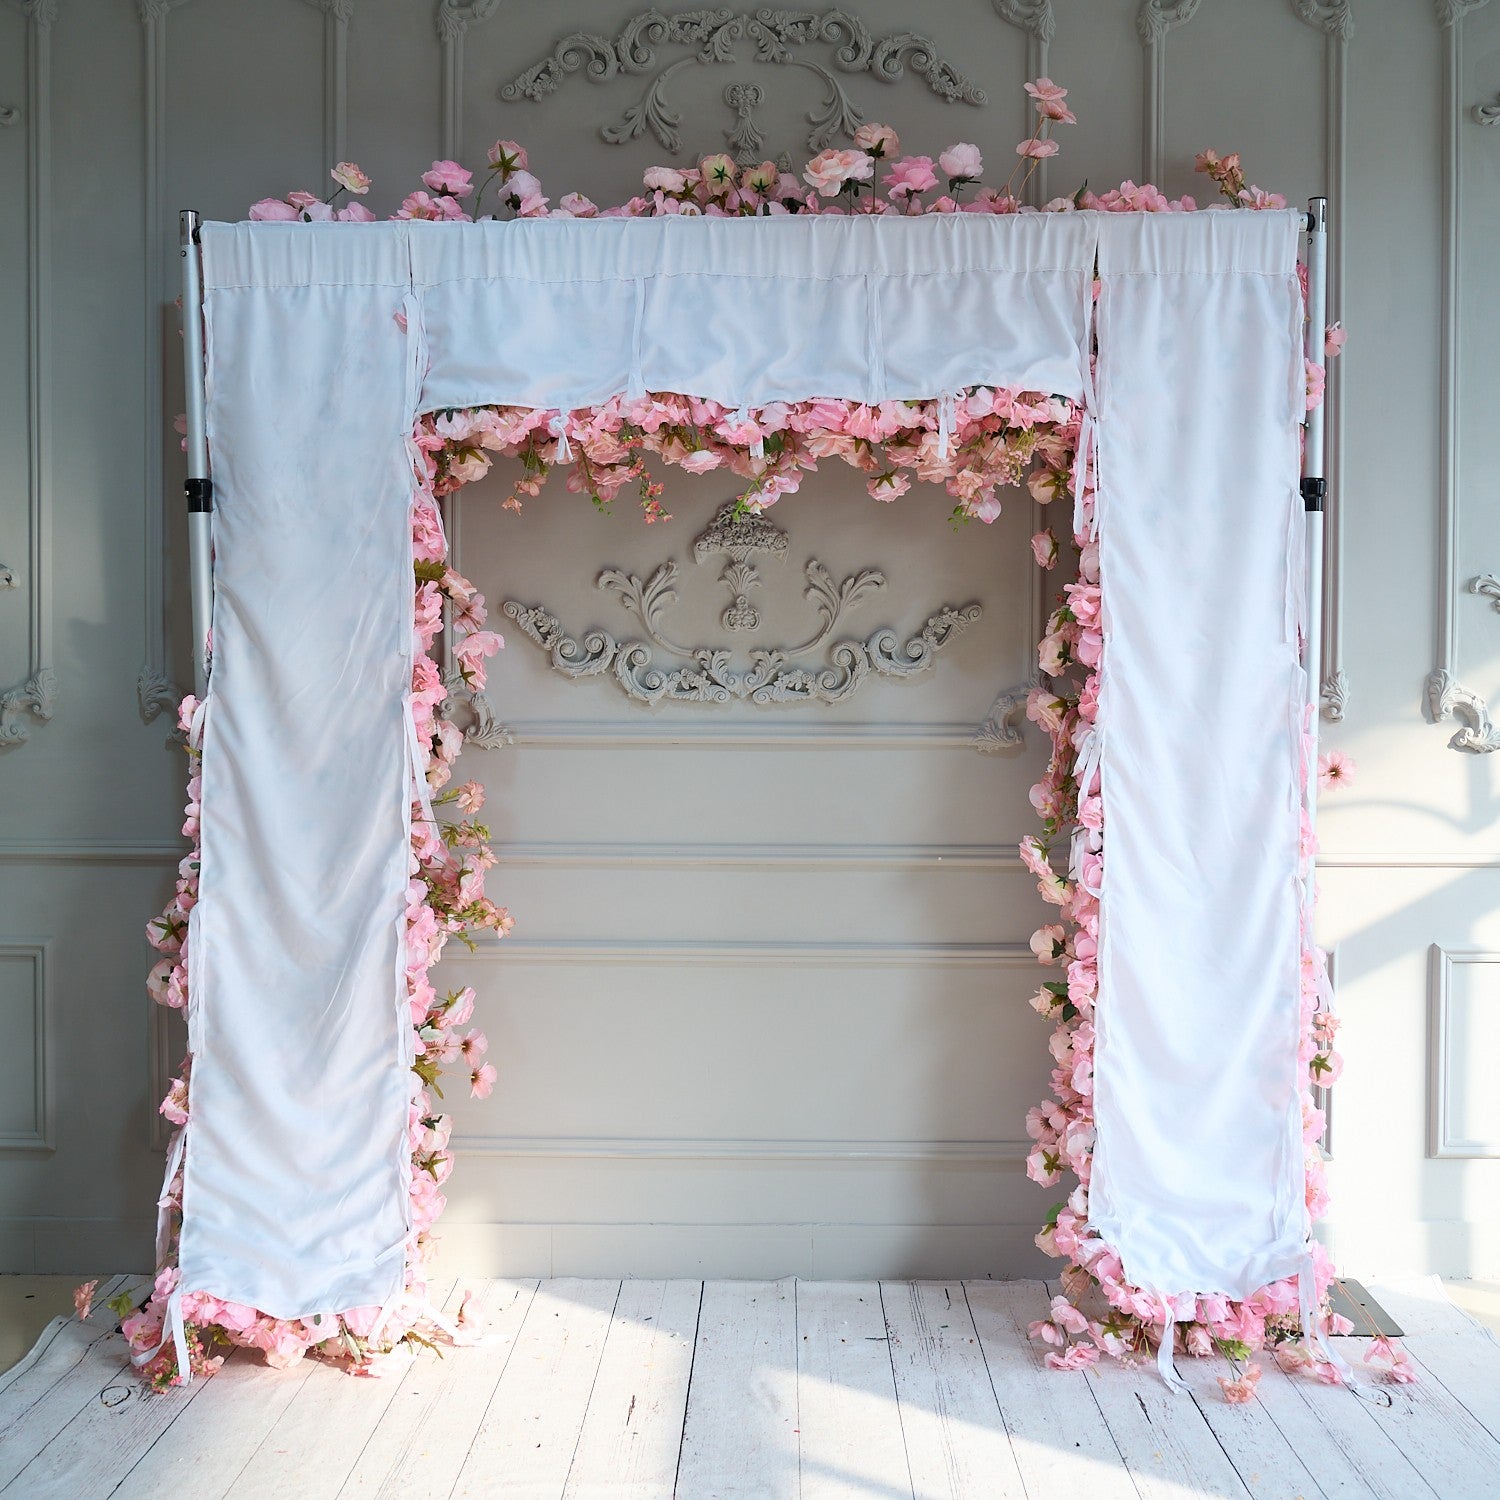 Flower Arch 8x8ft Pink Roses Florals Set Fabric Backdrop Flower Wall Proposal Wedding Party Decor